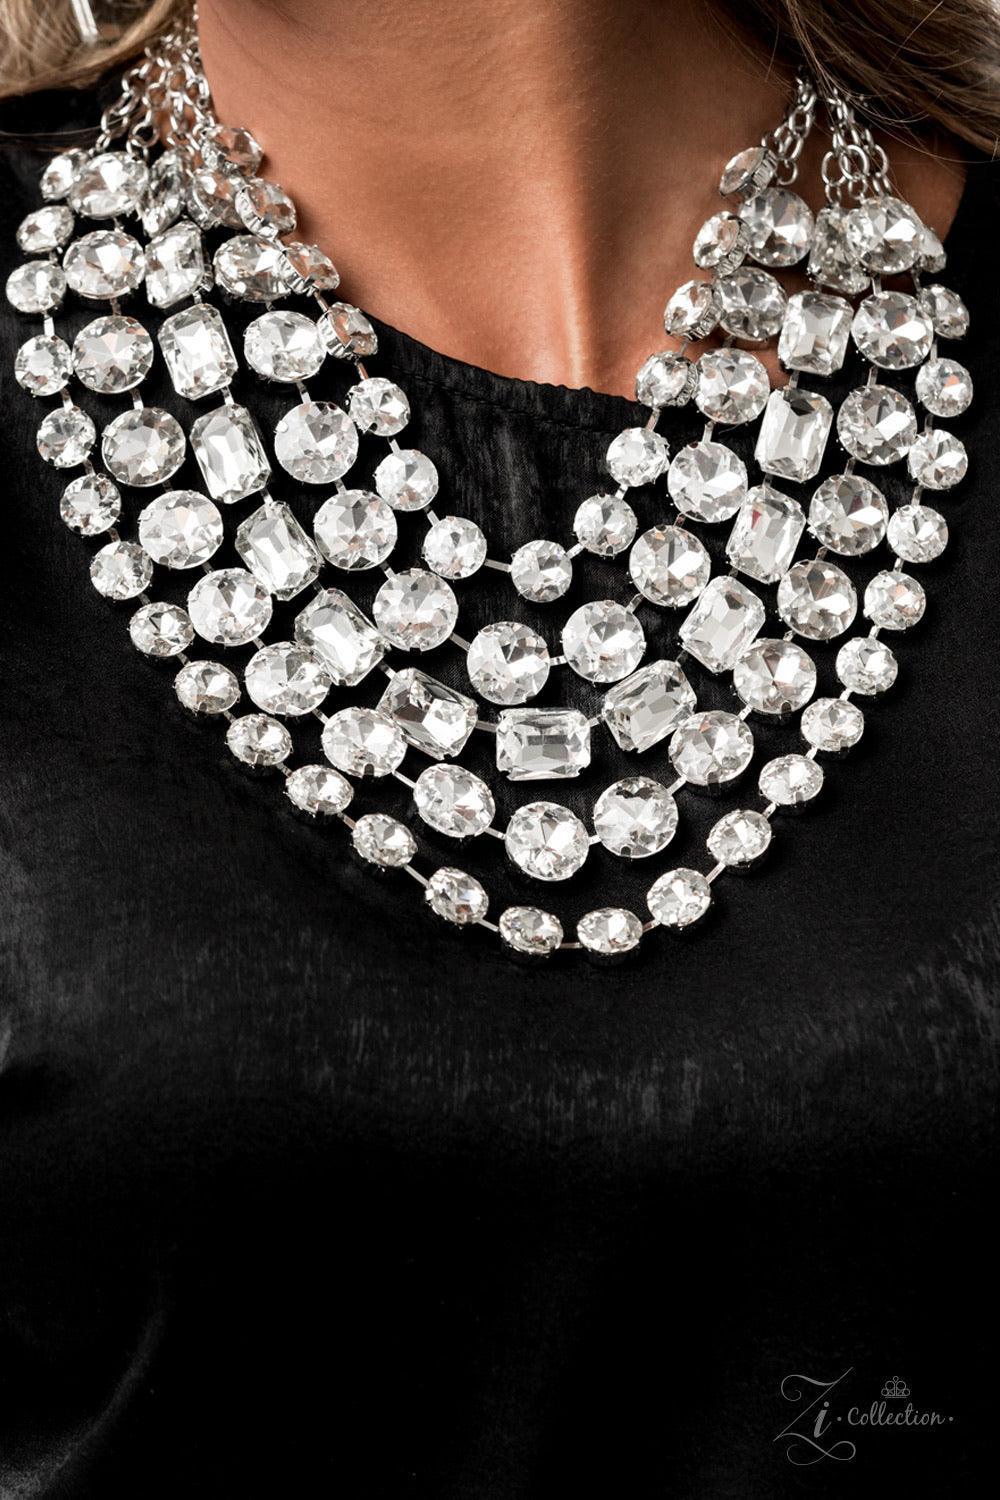 Paparazzi Accessories Irresistible 💗💗ZiCollection $25💗💗 Featuring round and emerald style cuts, row after row of dramatically oversized white rhinestones delicately link into blinding layers below the collar. Featuring sleek silver fittings, each rhin